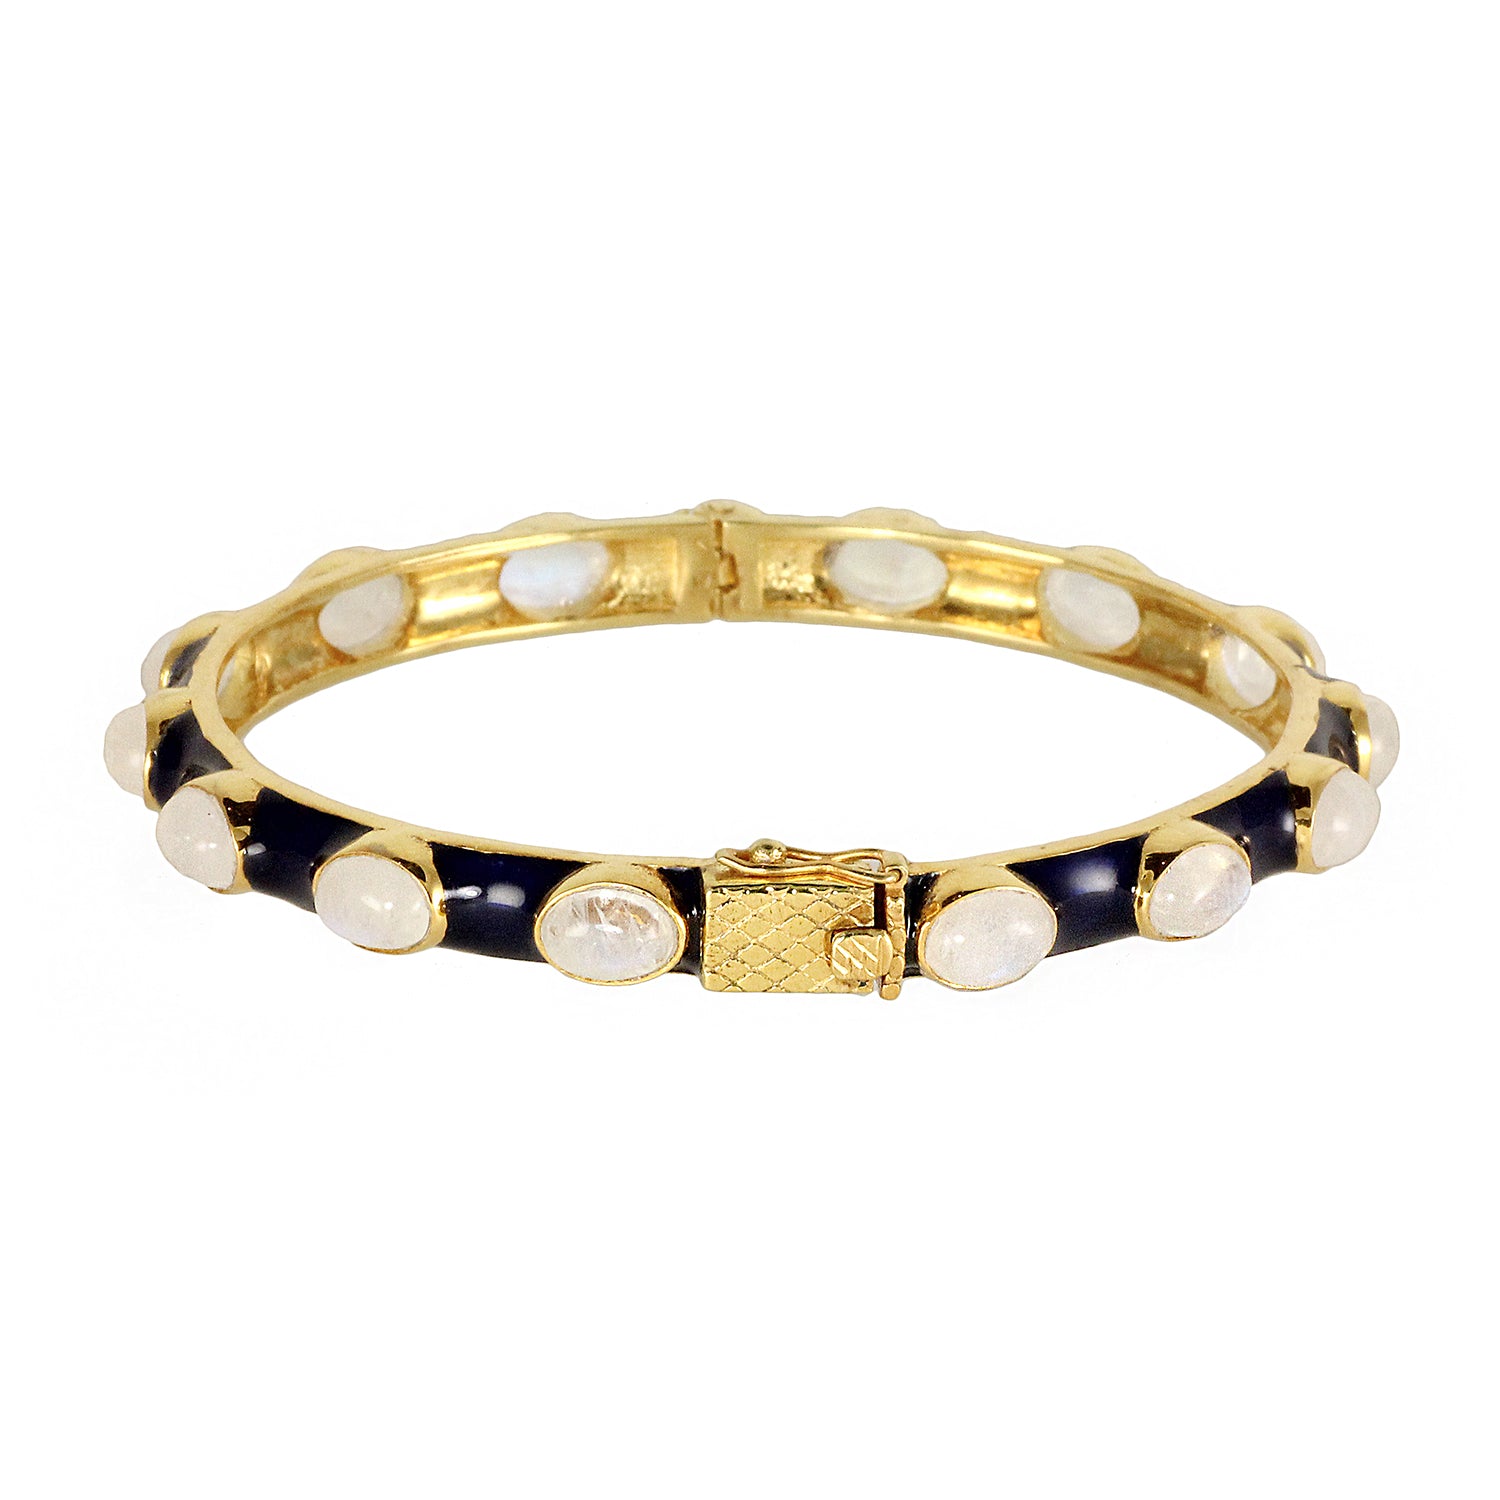 Blue enamel silver gold plated bracelet bangle with moonstones, made in Indian